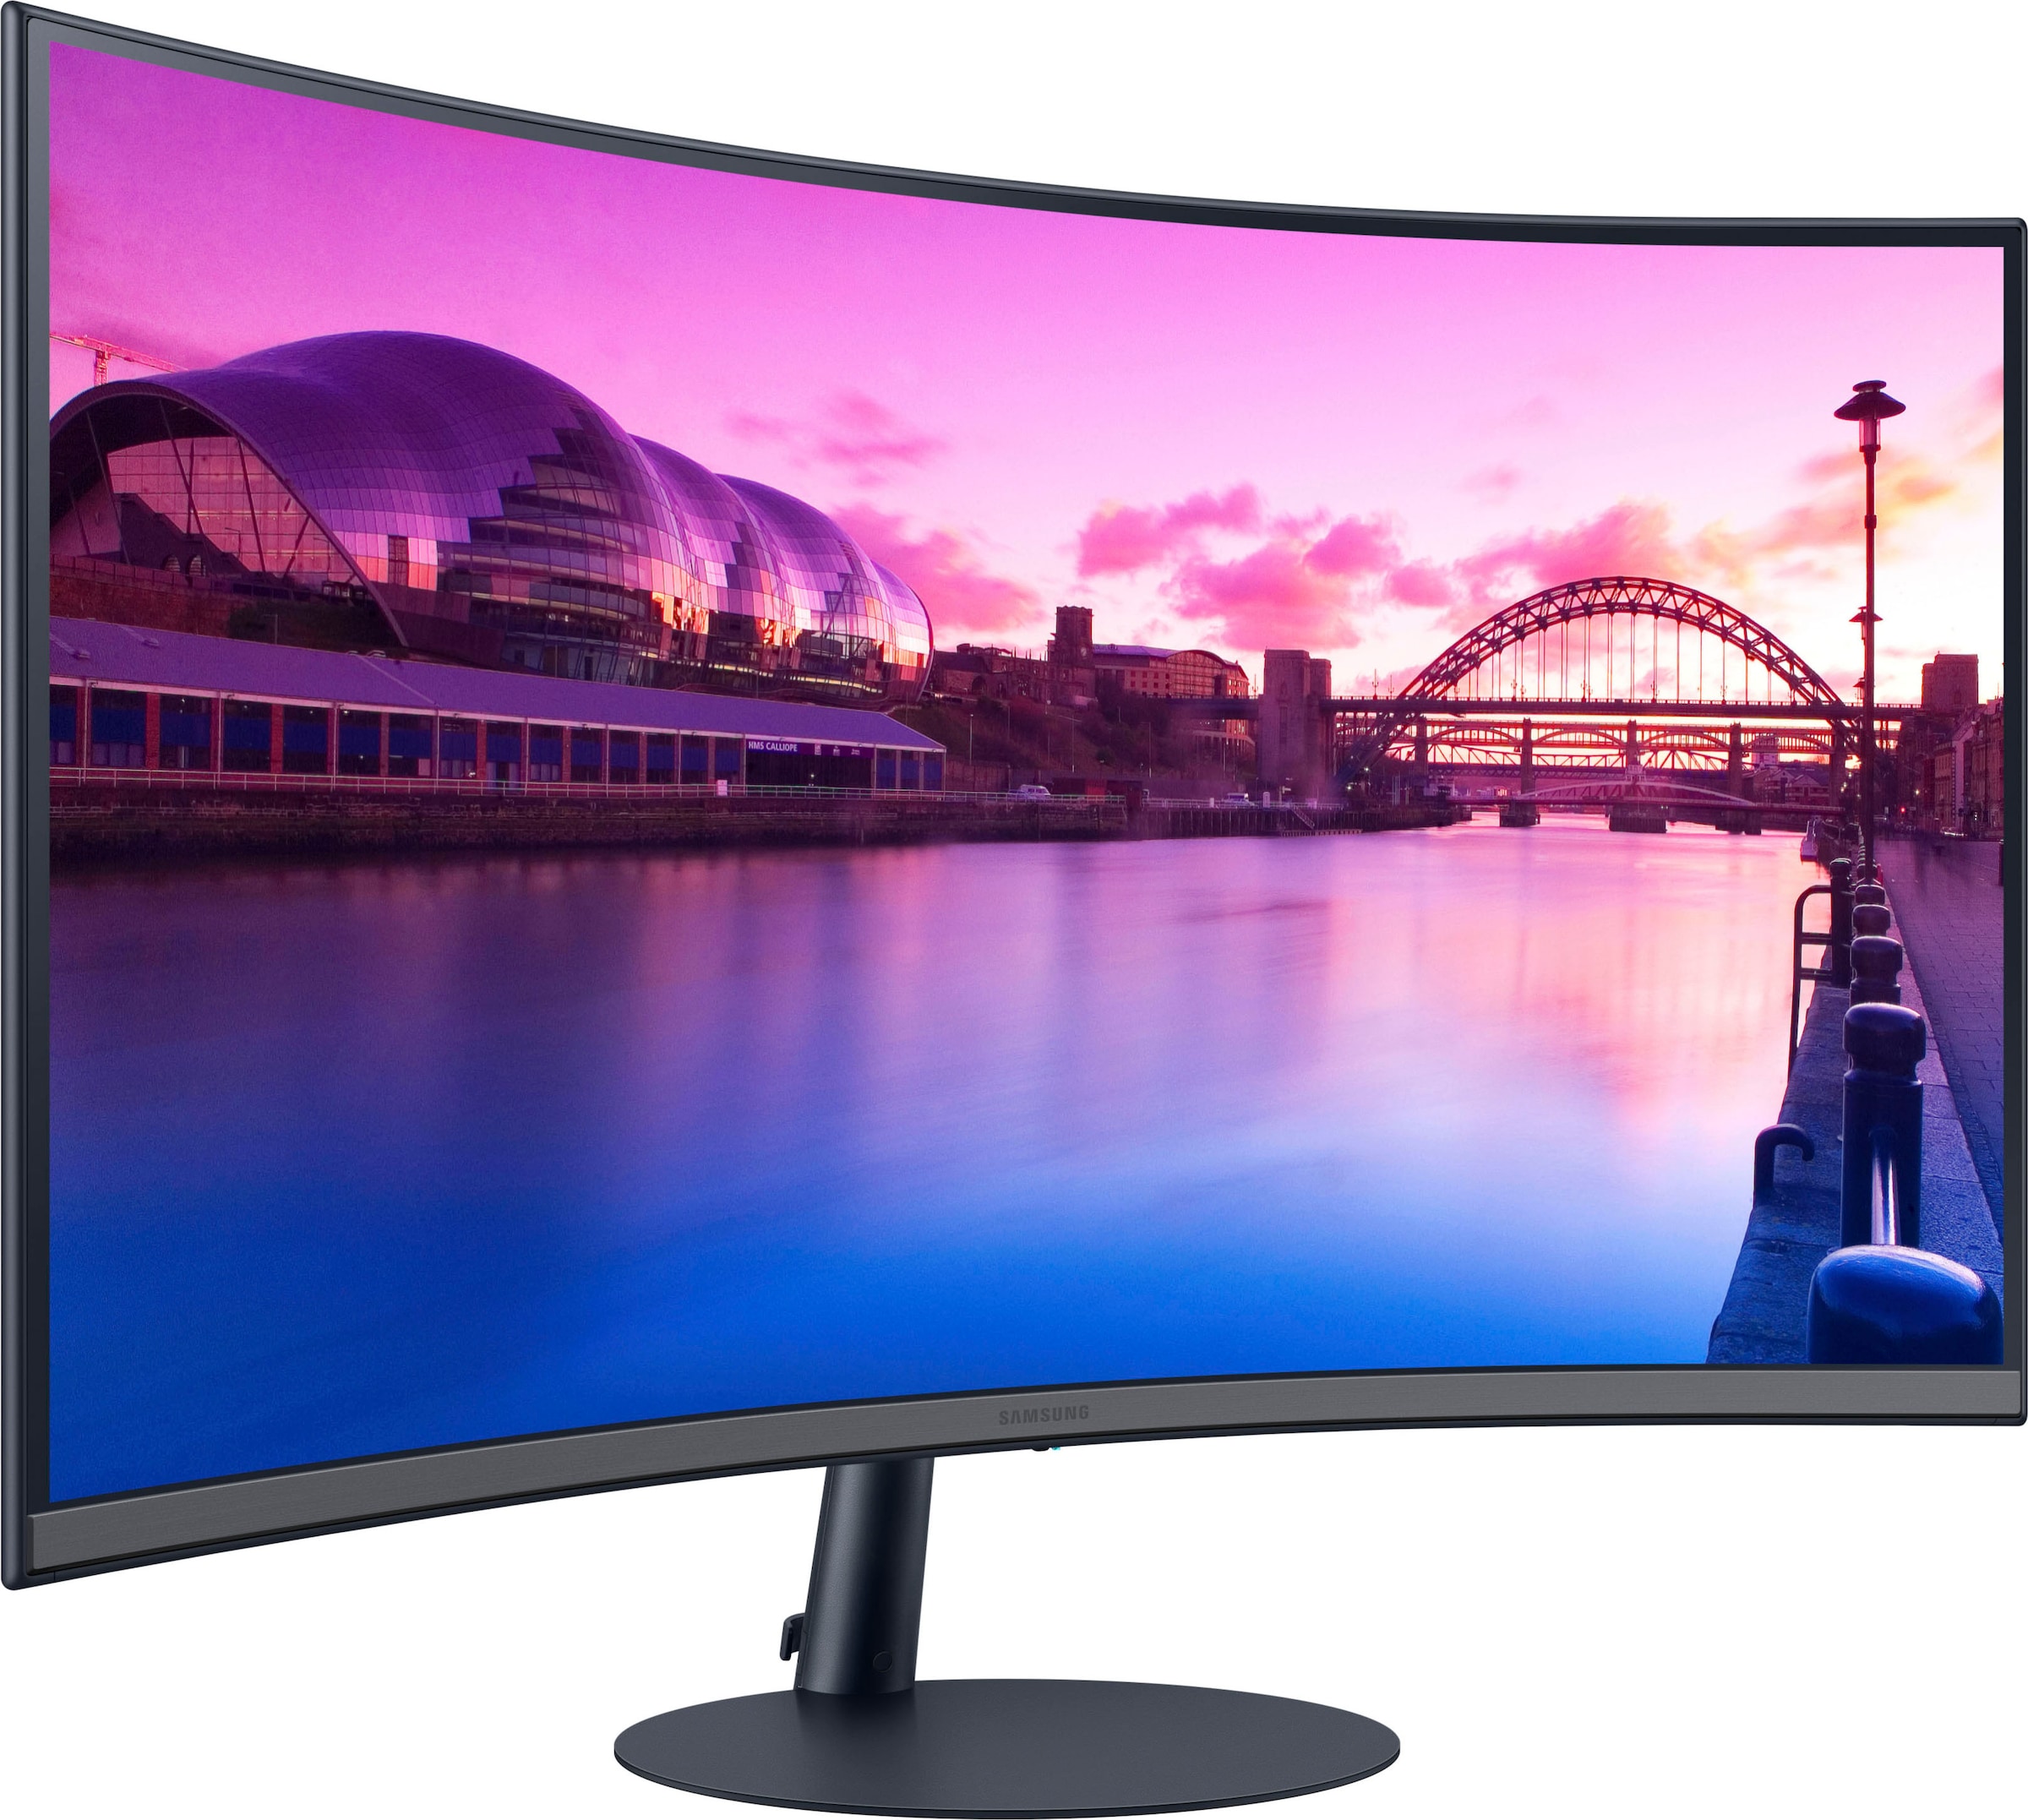 Samsung Curved-LED-Monitor 75 px, cm/27 bei 1920 ms online »S27C390EAU«, OTTO Zoll, x Full HD, Hz 1080 Reaktionszeit, 68,6 4